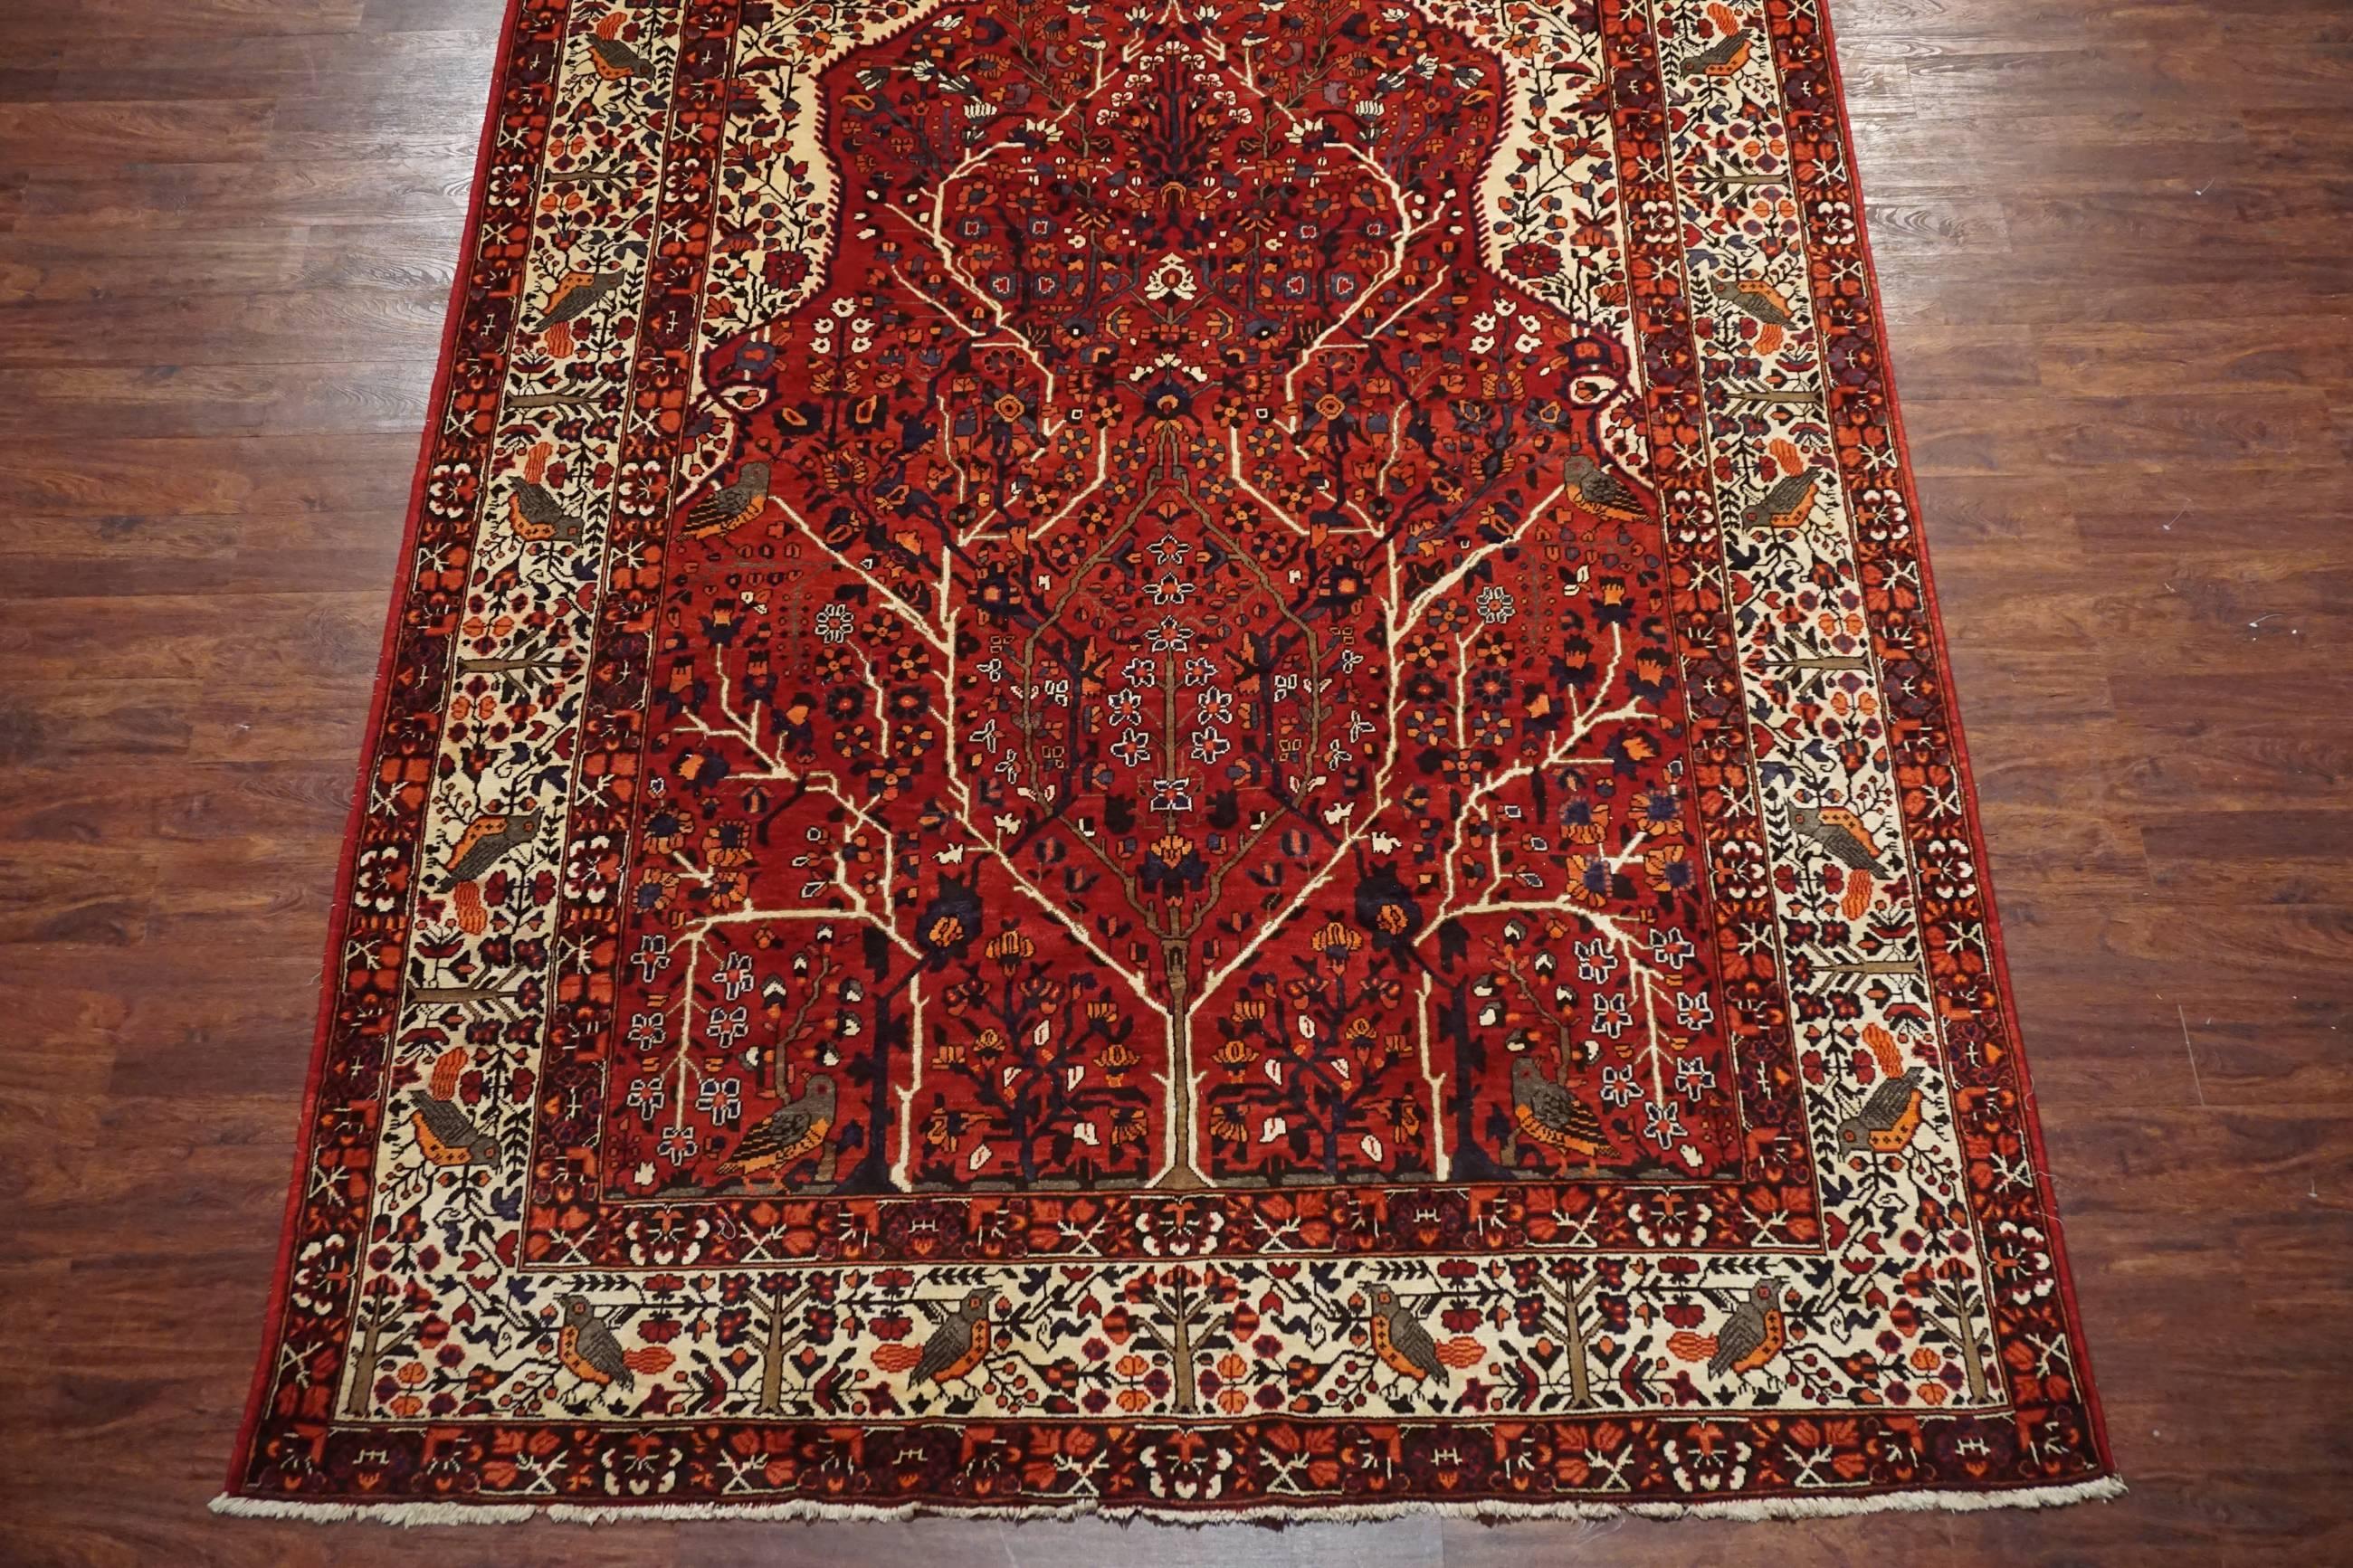 Persian antique Tabriz with birds and tree of life design

circa 1940

Measures: 7' 5